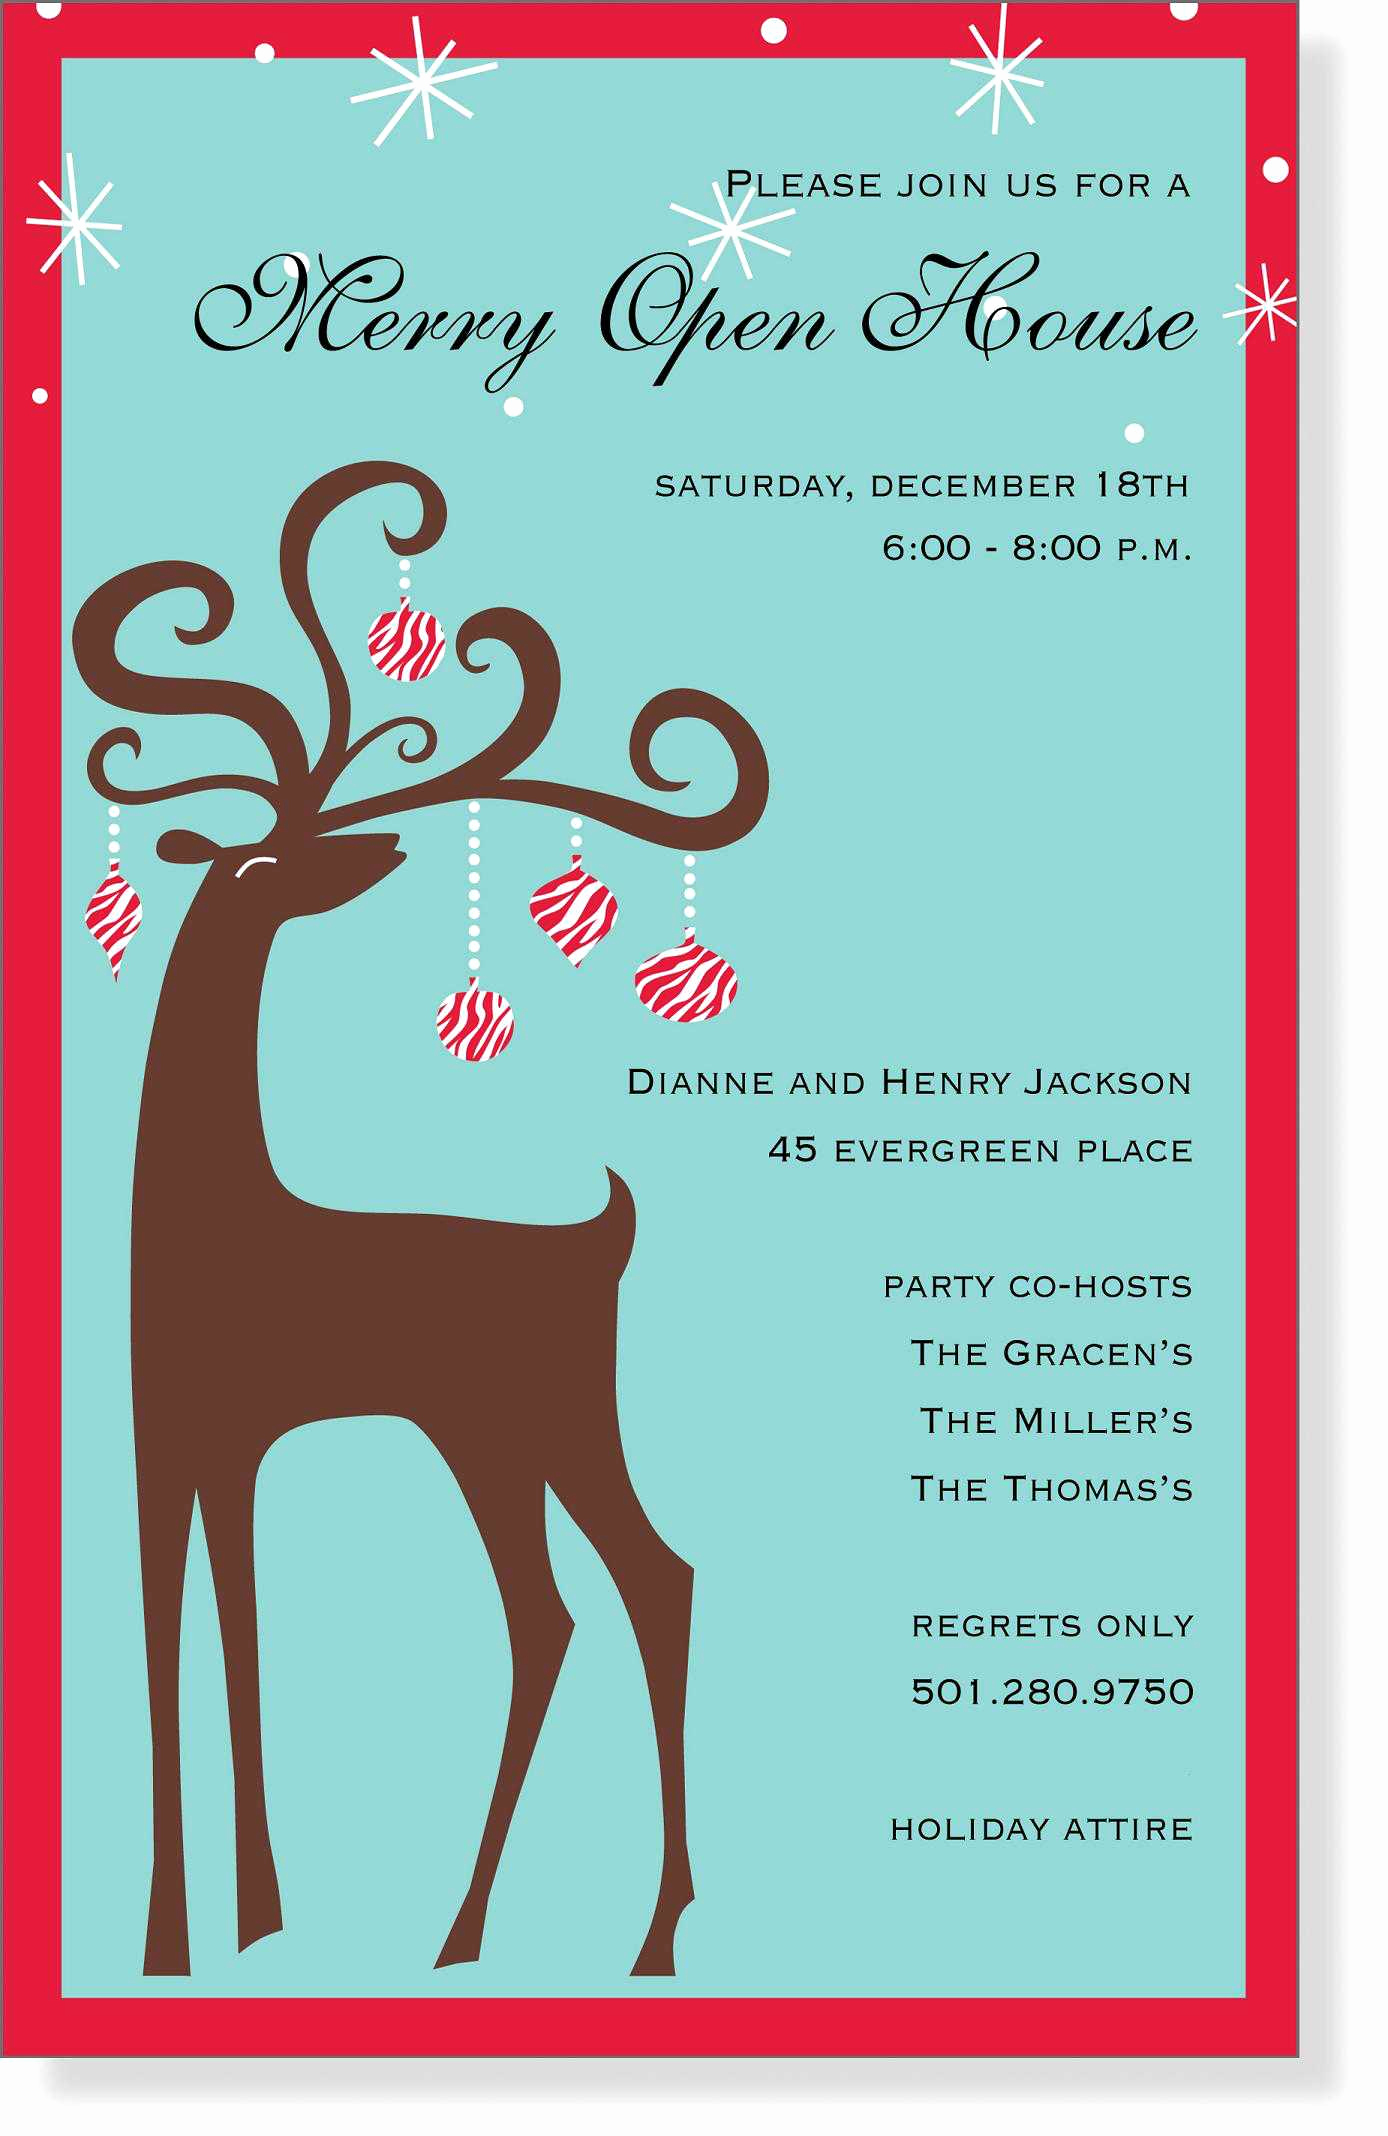 Funny Christmas Party Invitation Wording Awesome Christmas Invitations Christmas Invitations for Special